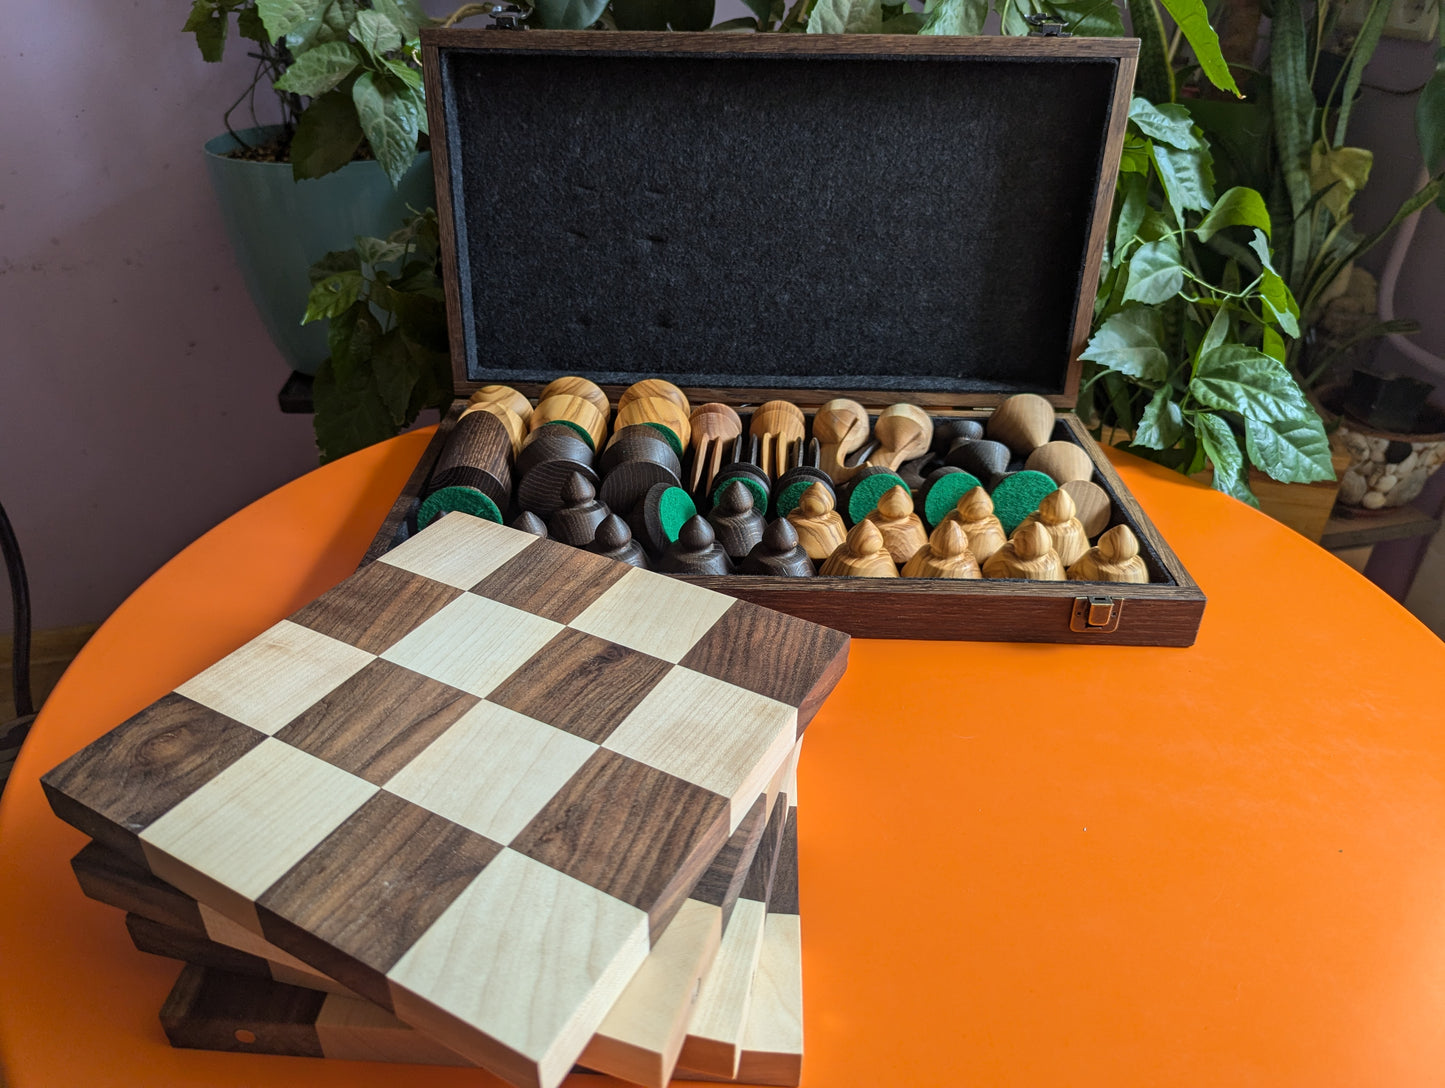 5.5" Handmade wood abstract artistic chess set in wooden box